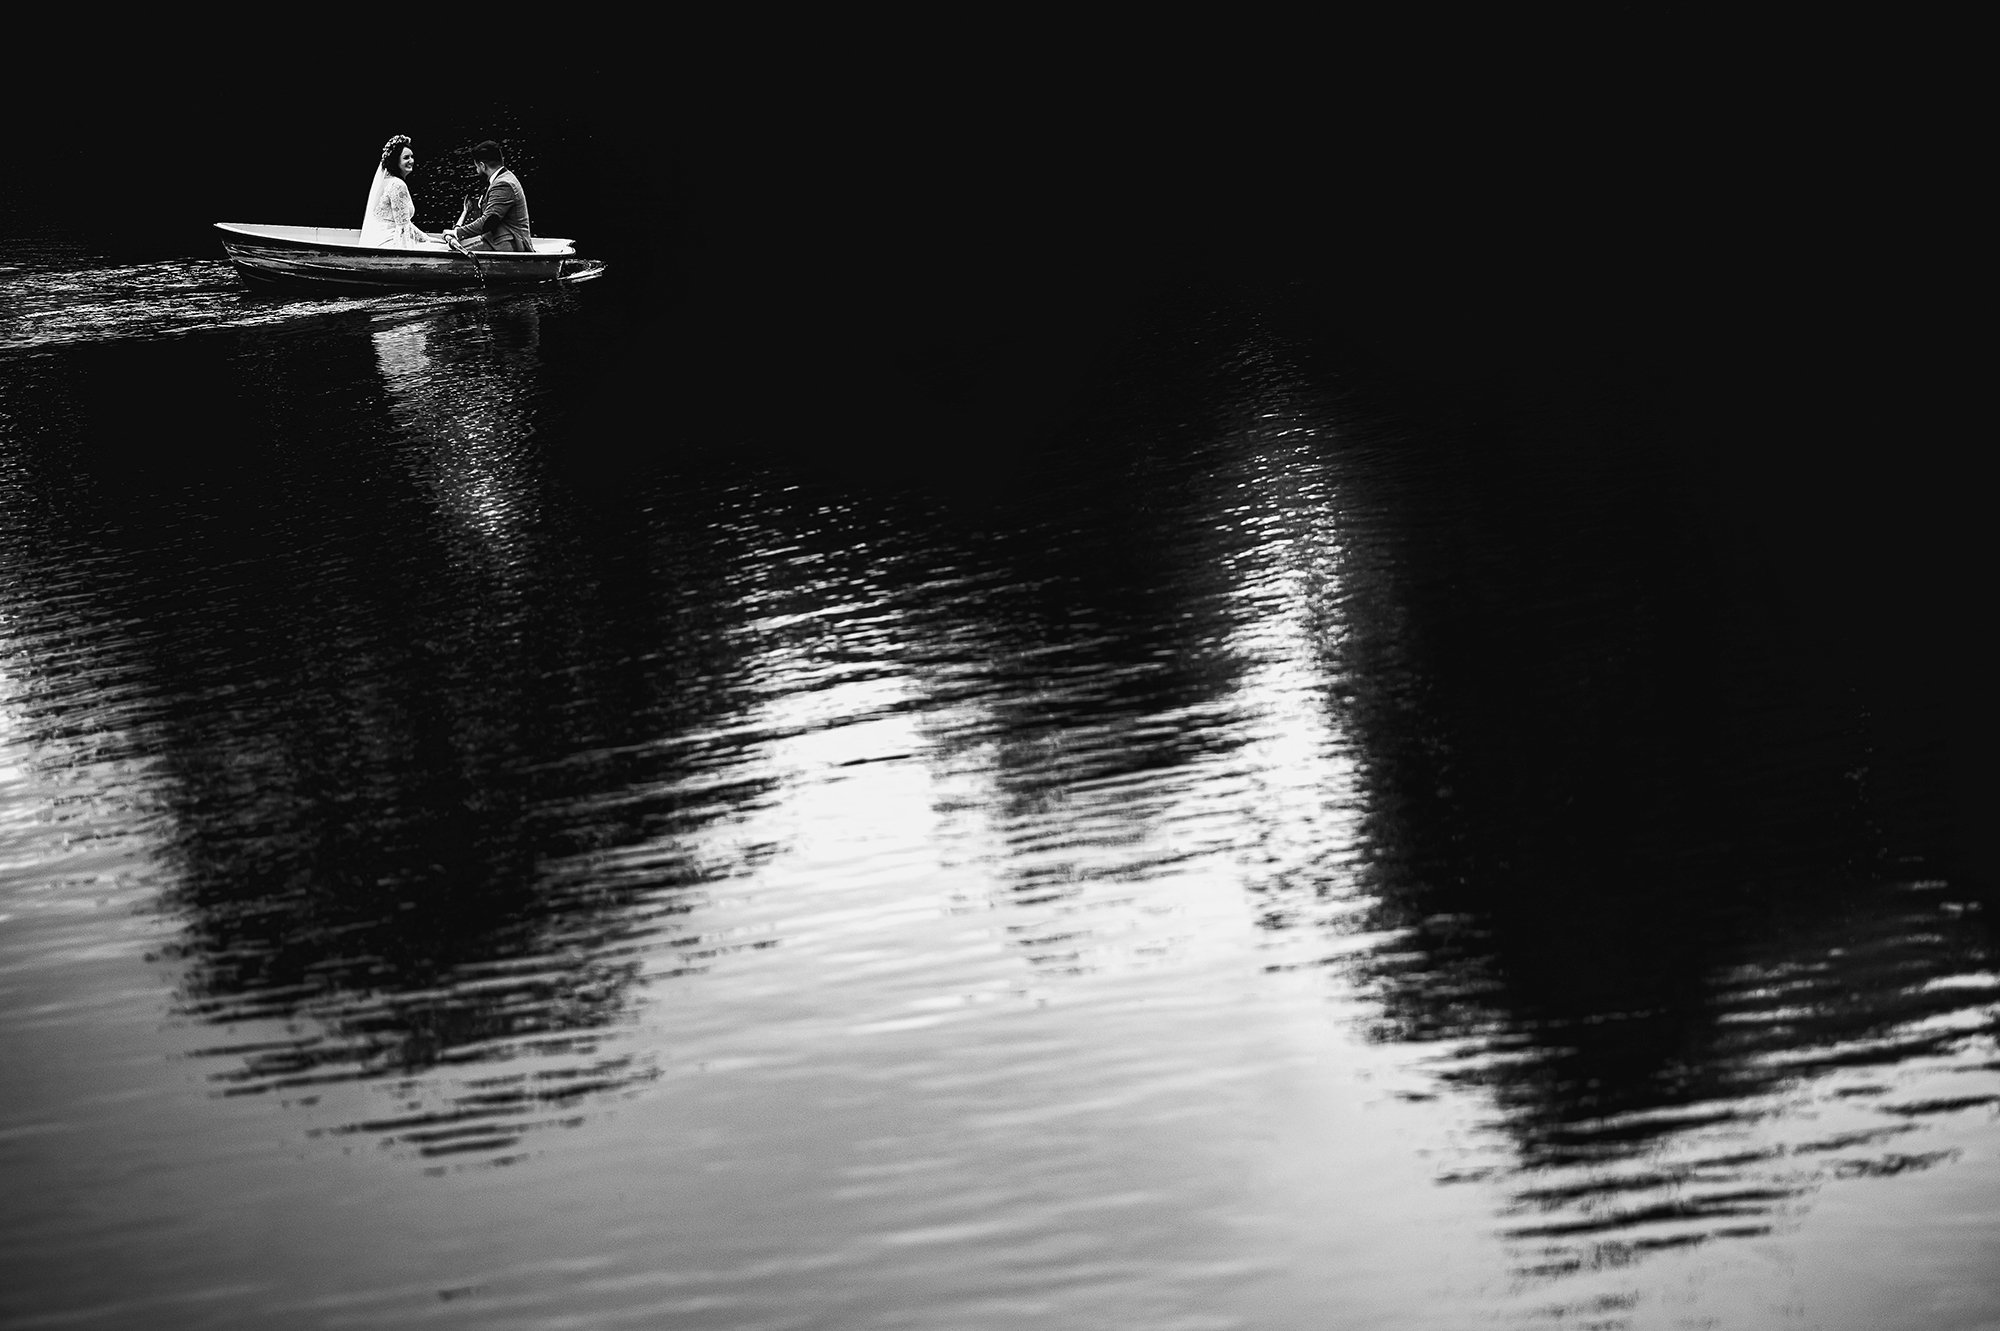  Bride and groom rowing a boat on a lake. 